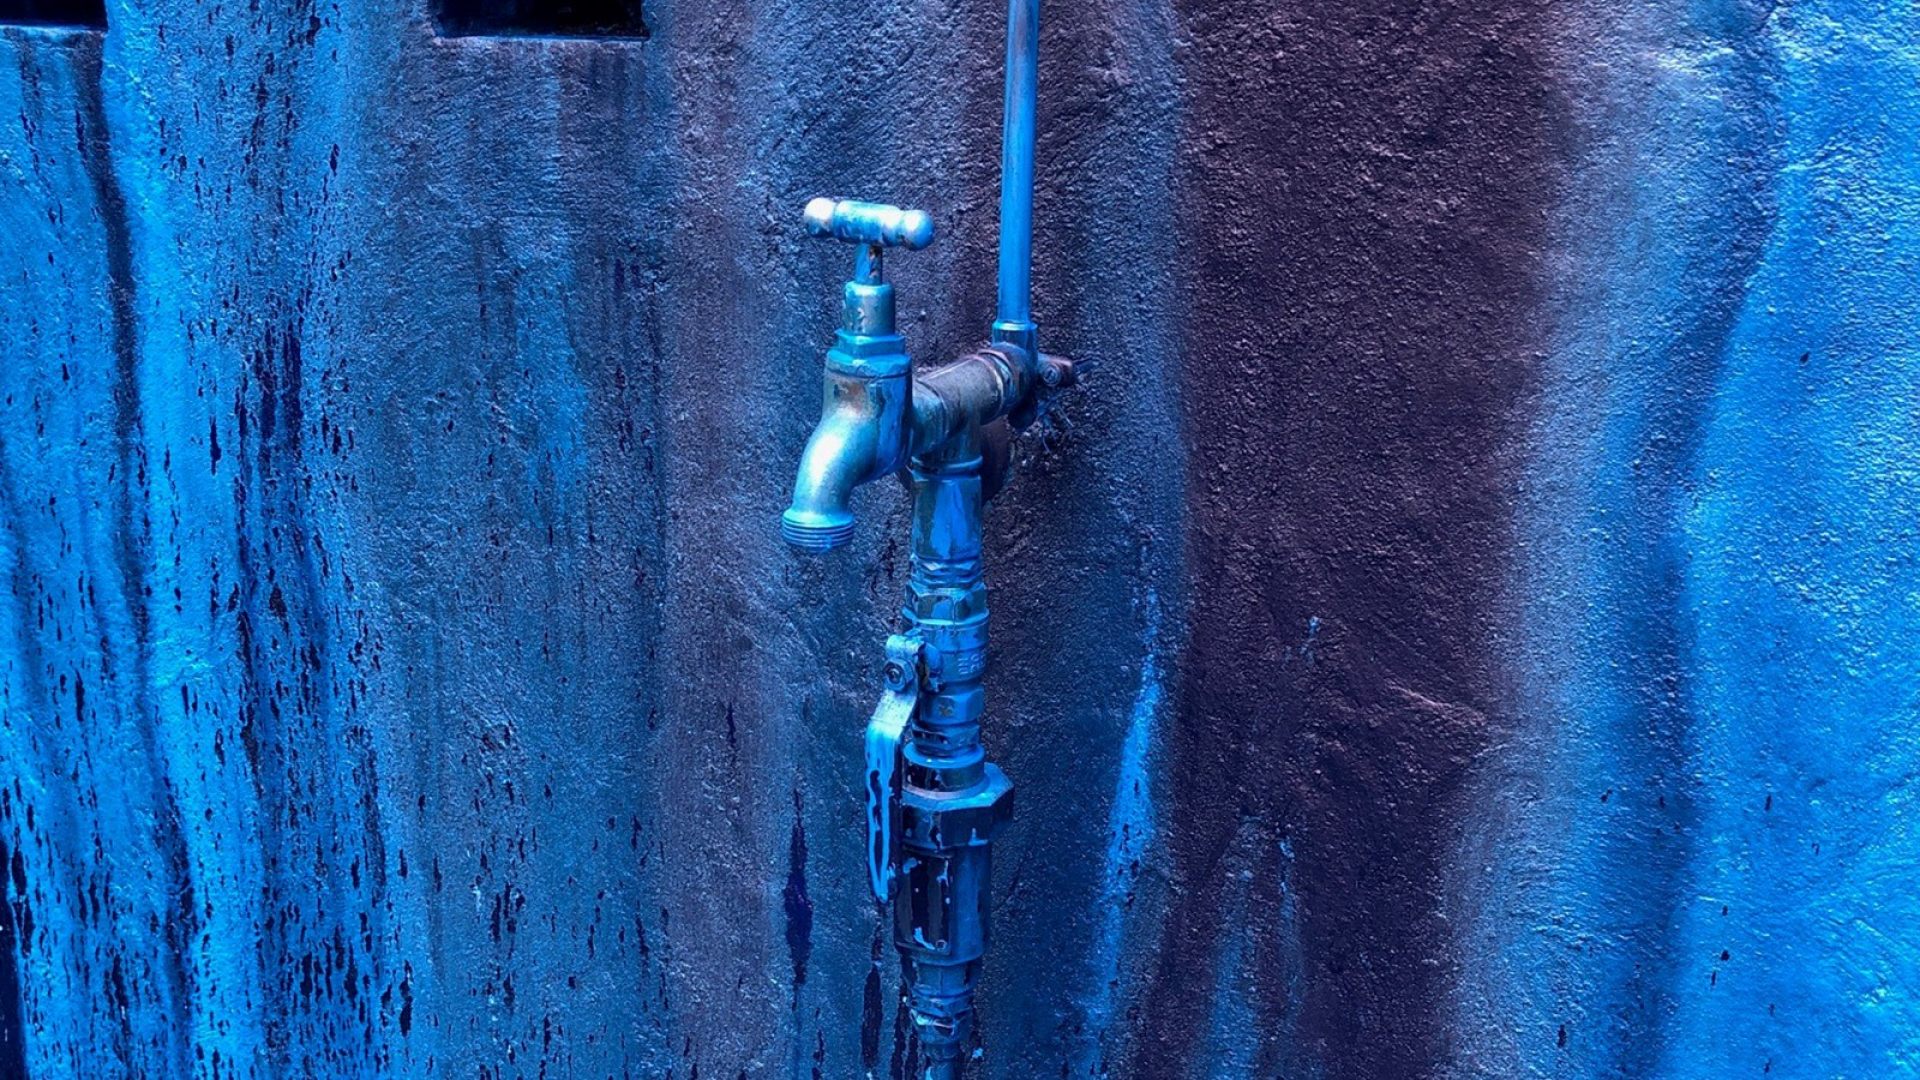 A silver tap is mounted to a wall. The whole image has a blue wash